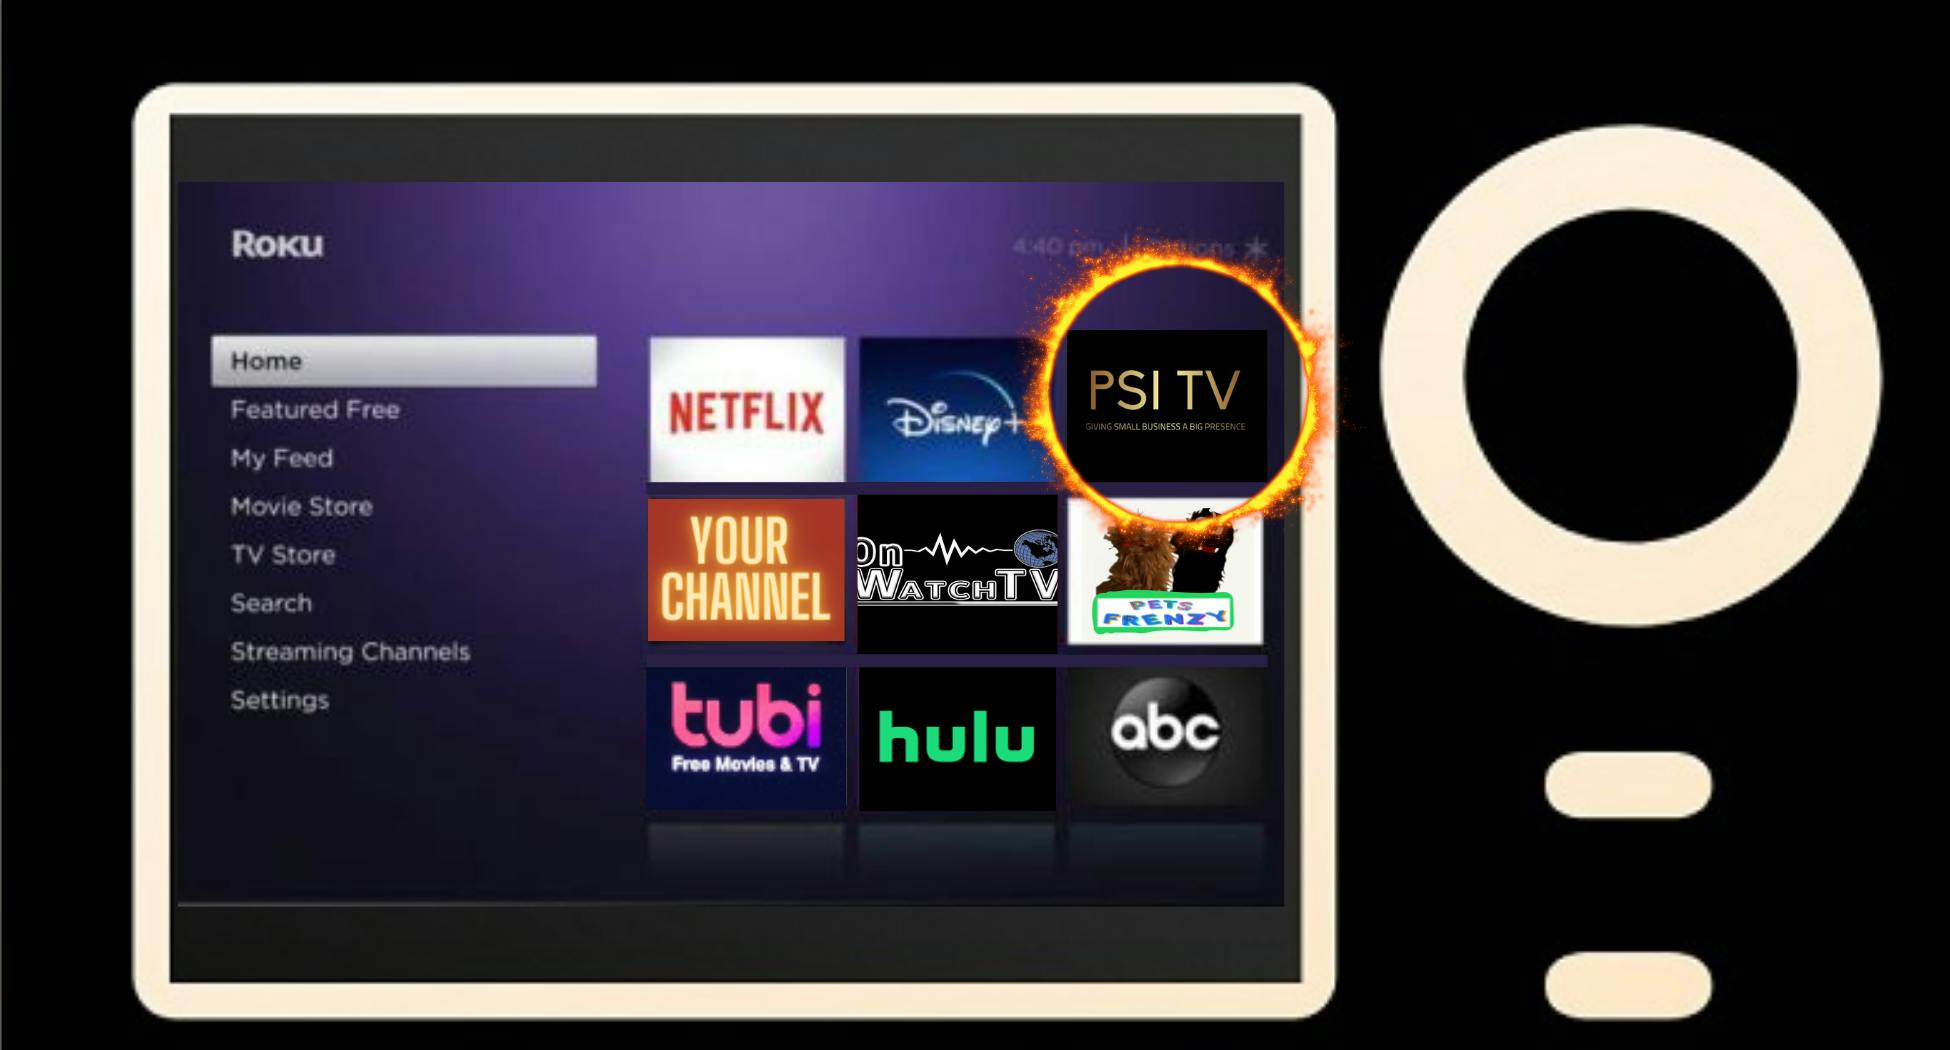 The PSI TV channel on a Roku TV